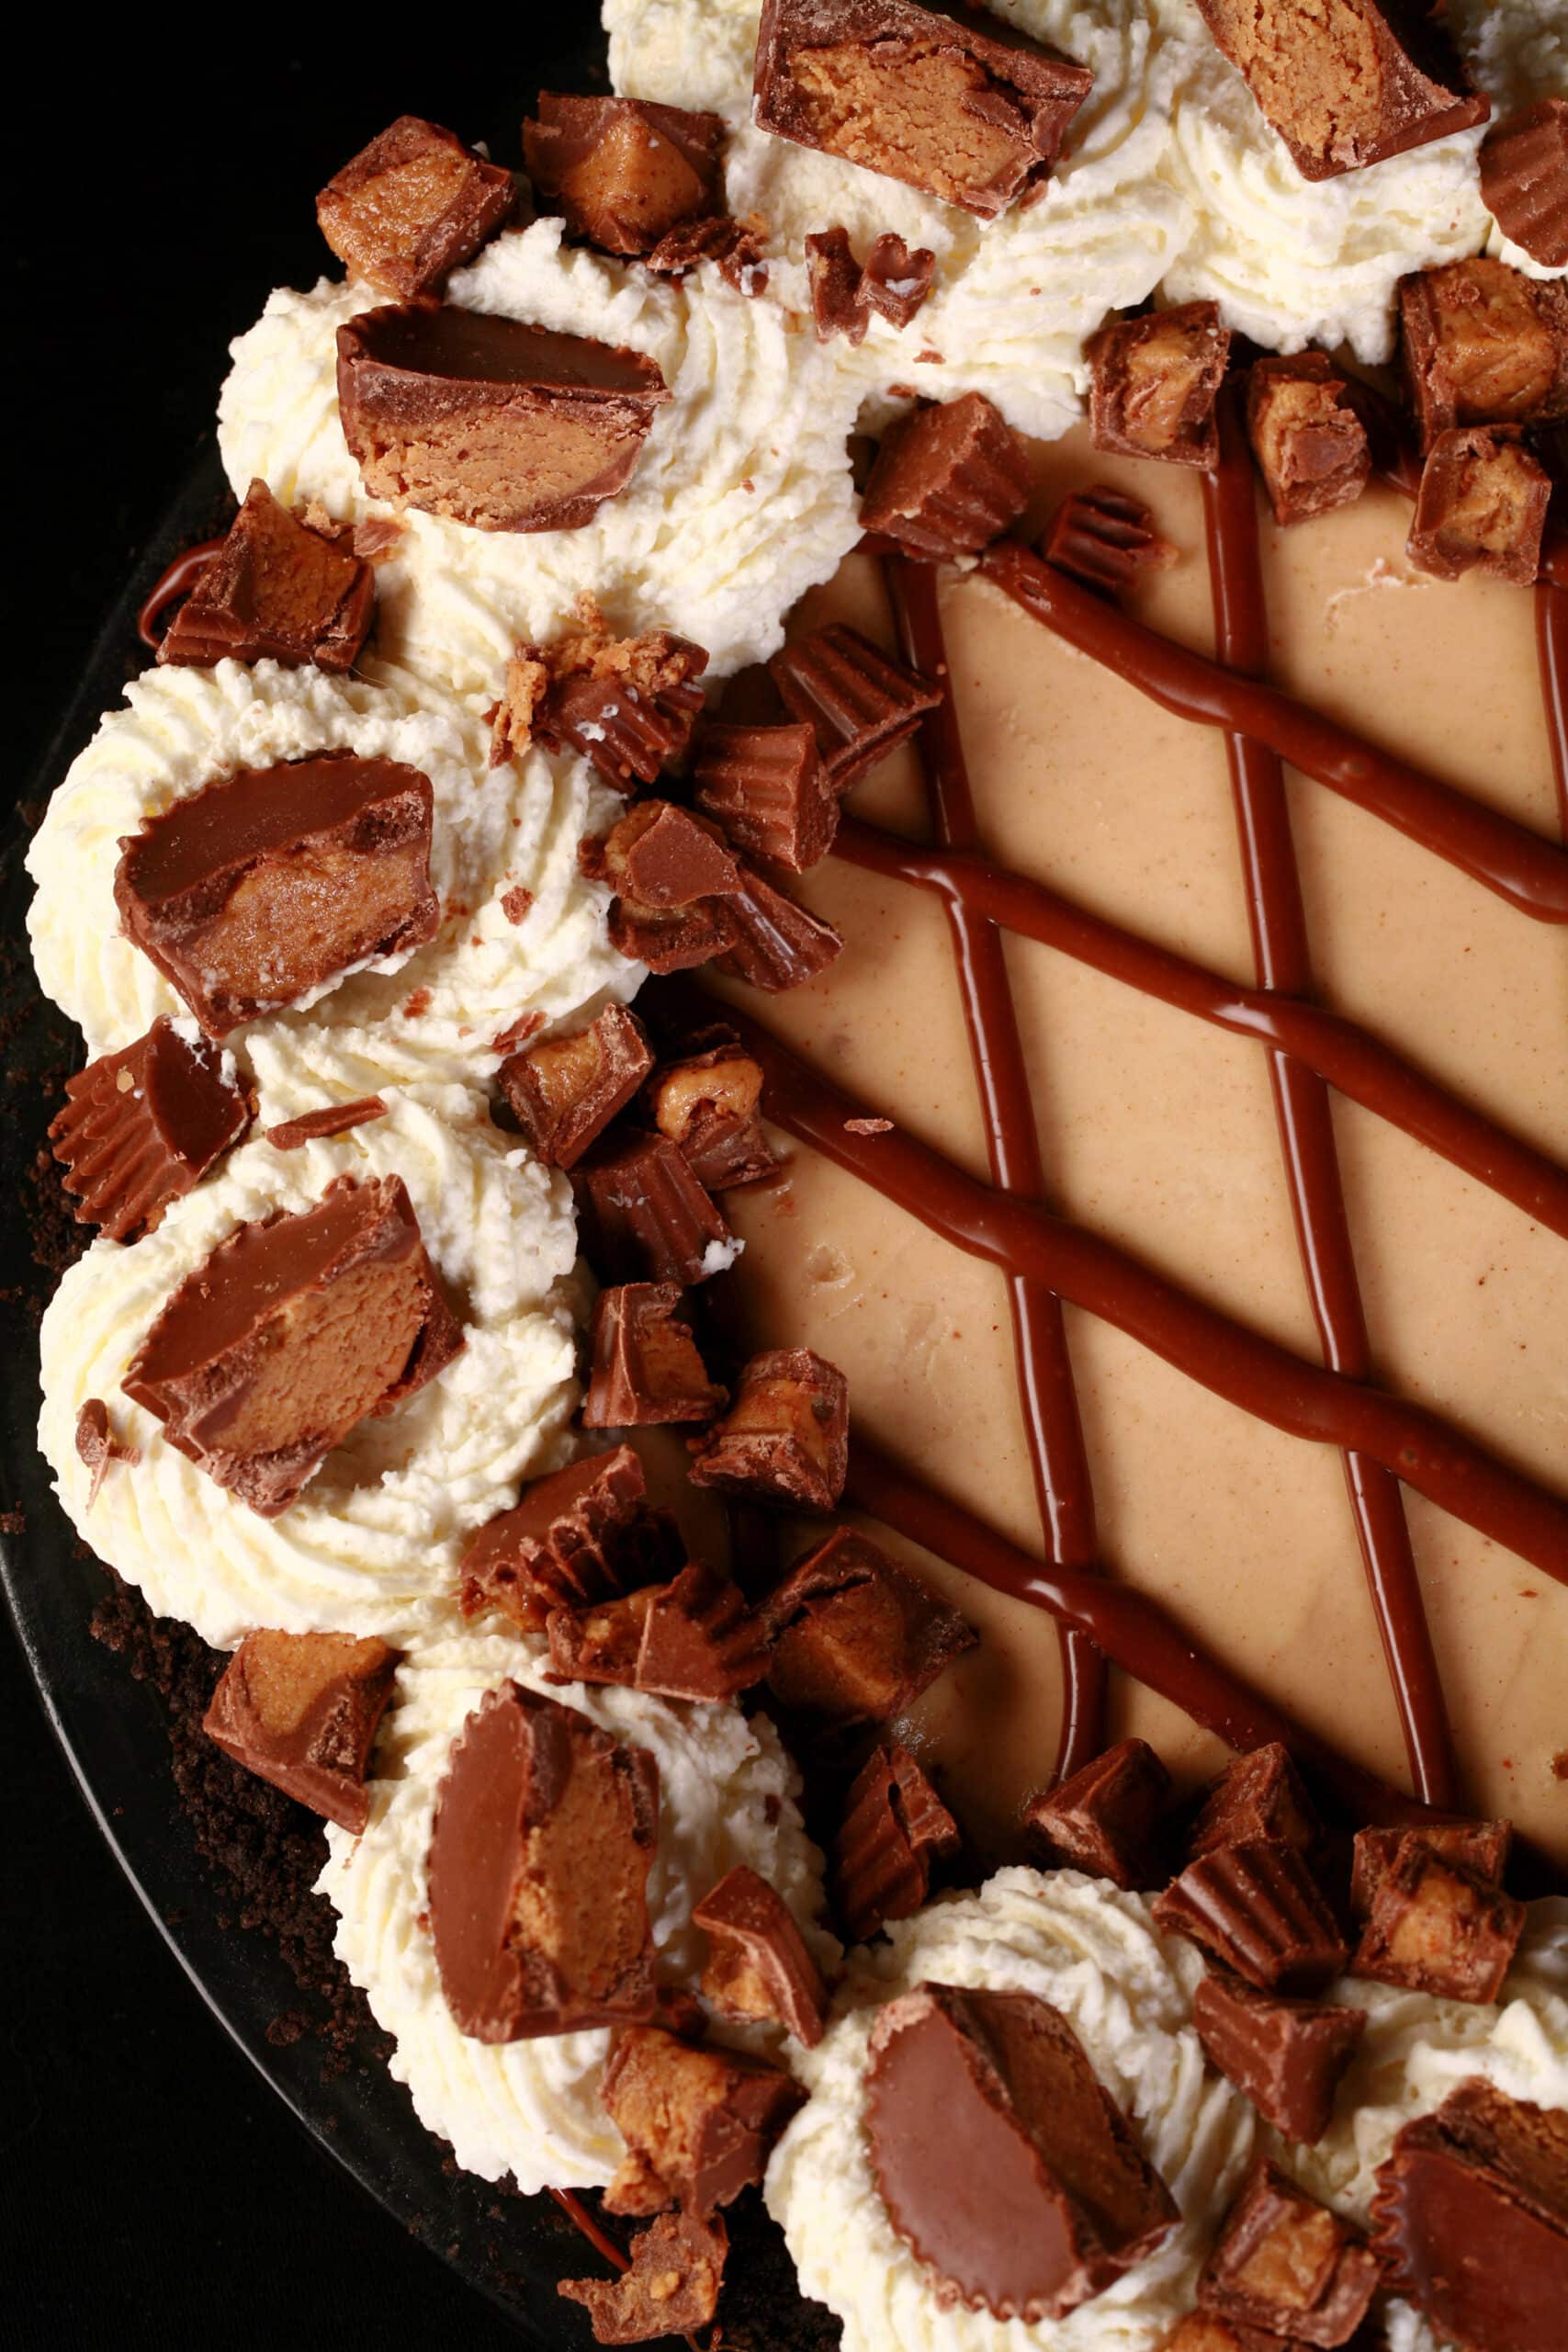 A Reese’s Peanut Butter Pie, with chocolate lattice top,  whipped cream rosettes, and chopped peanut butter cups.